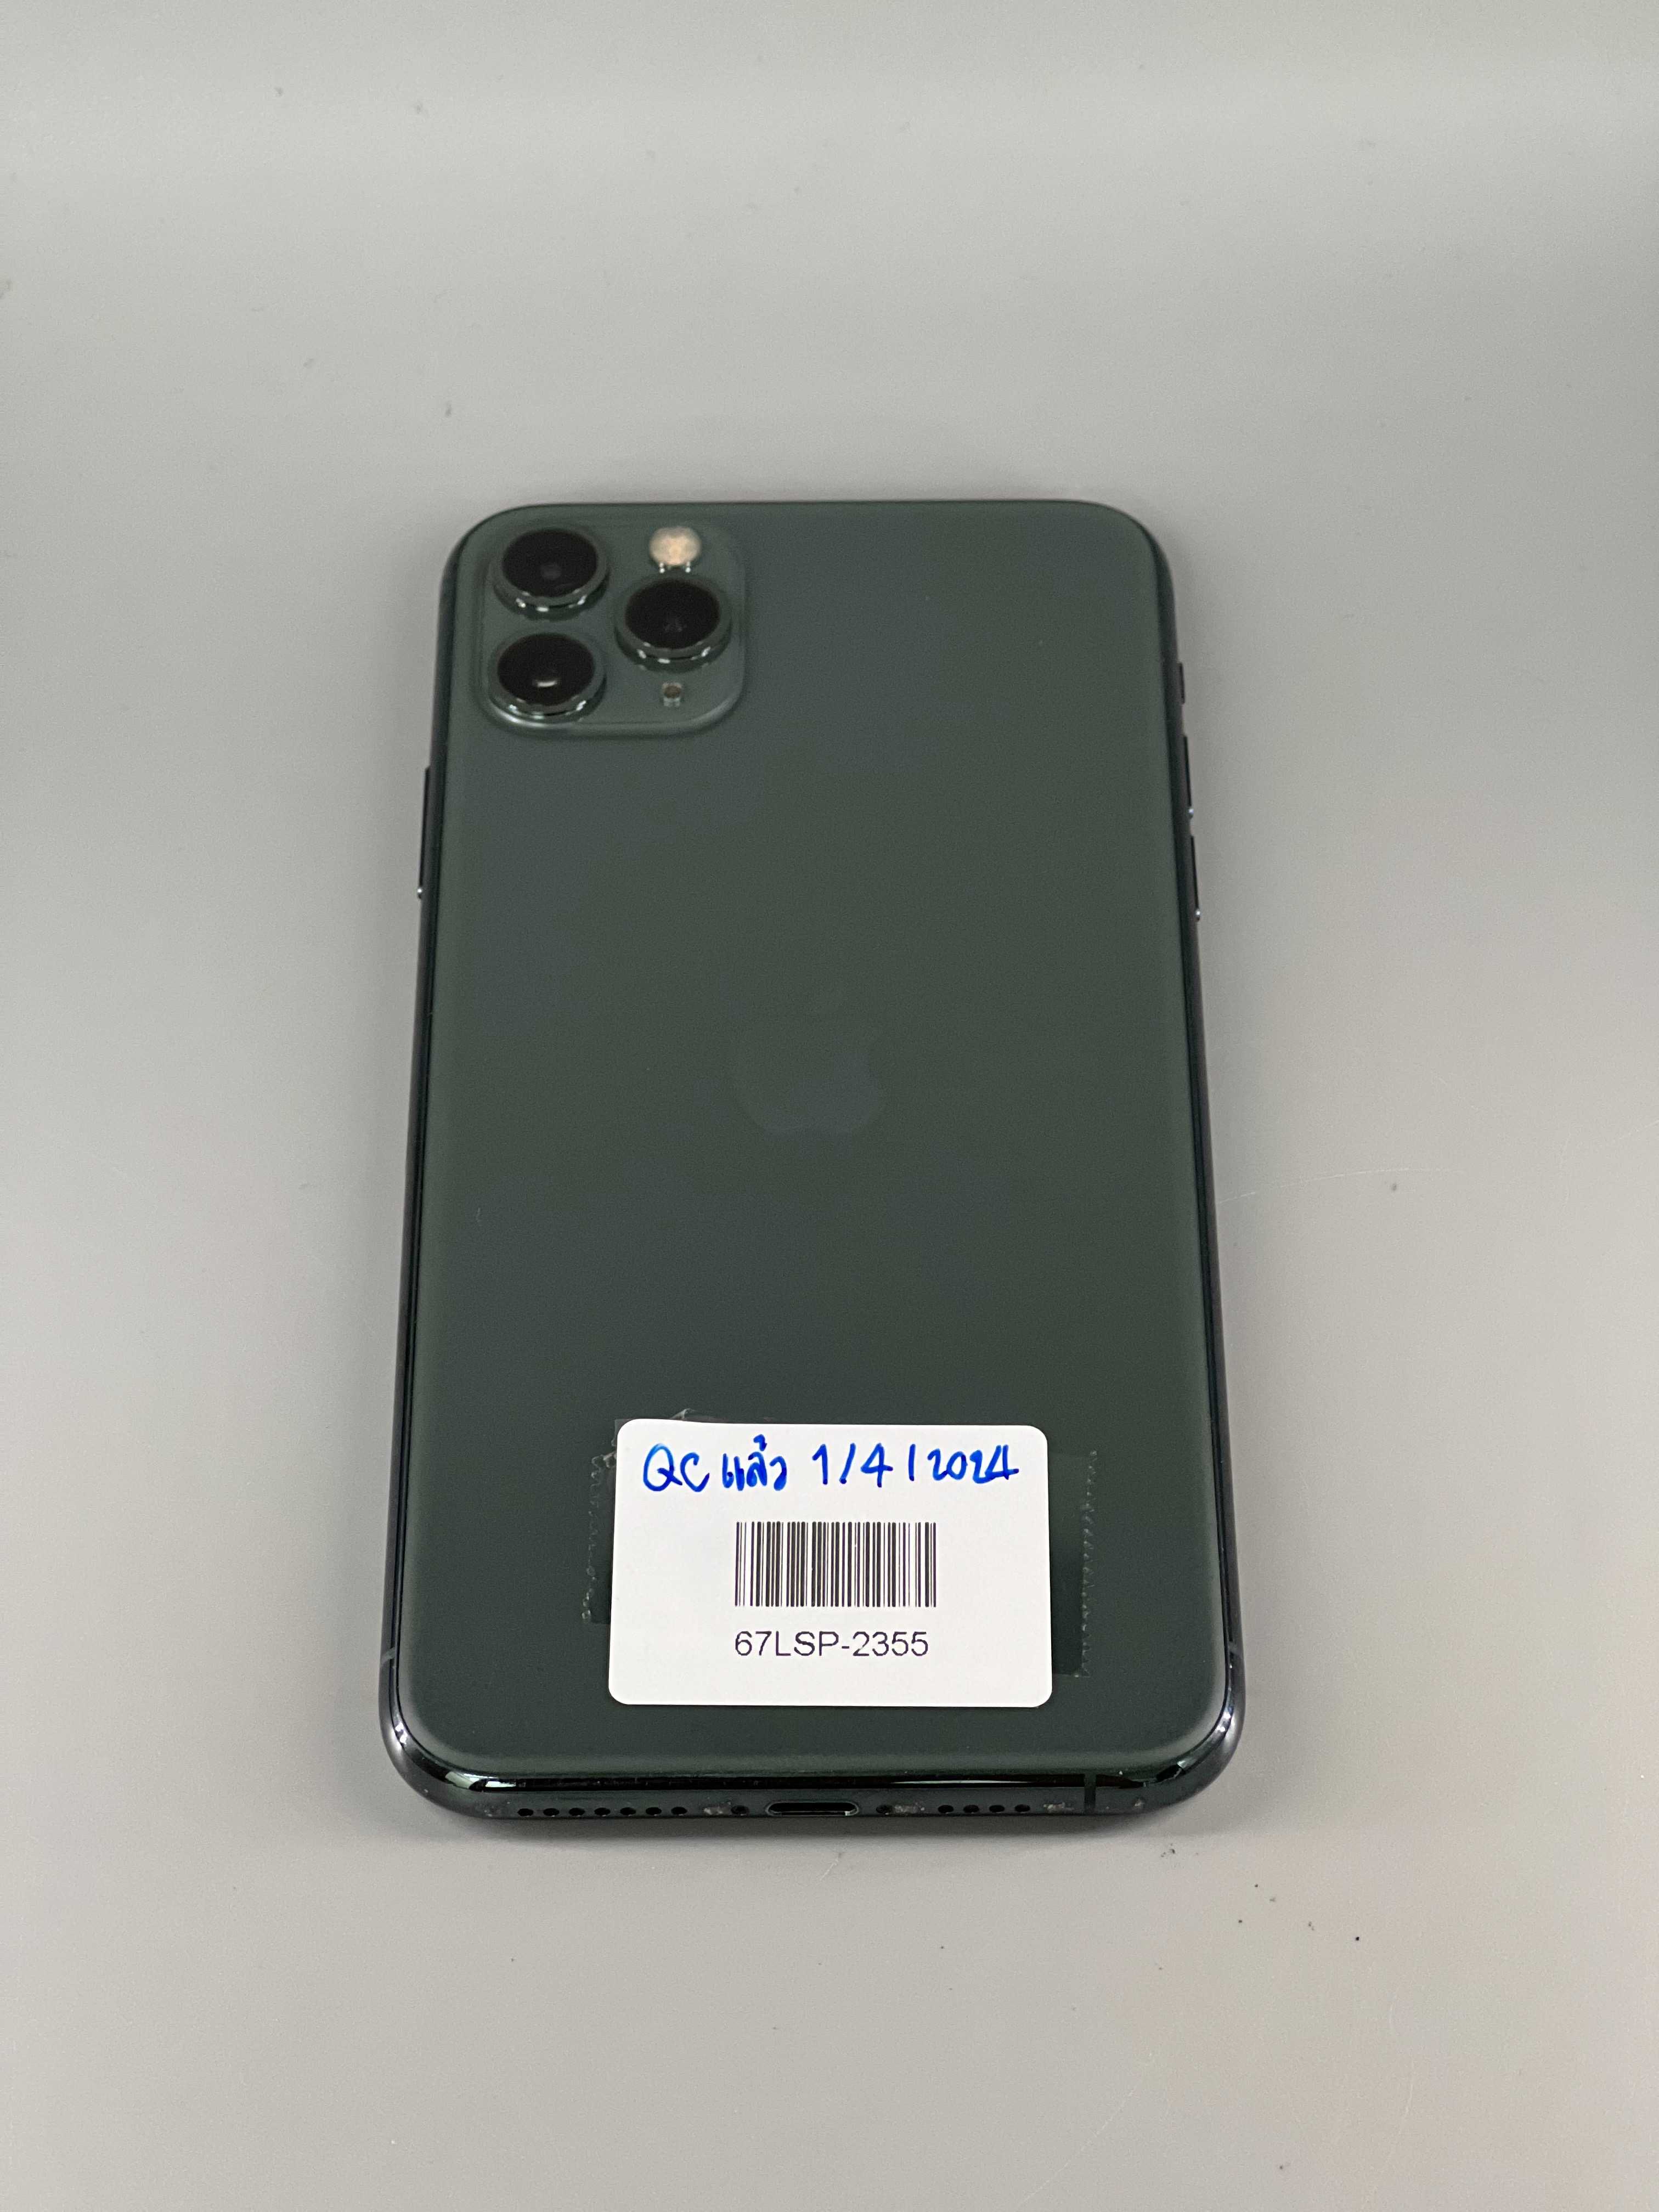 Used iPhone 11 Promax 64gb Midnight Green 67LSP-2355